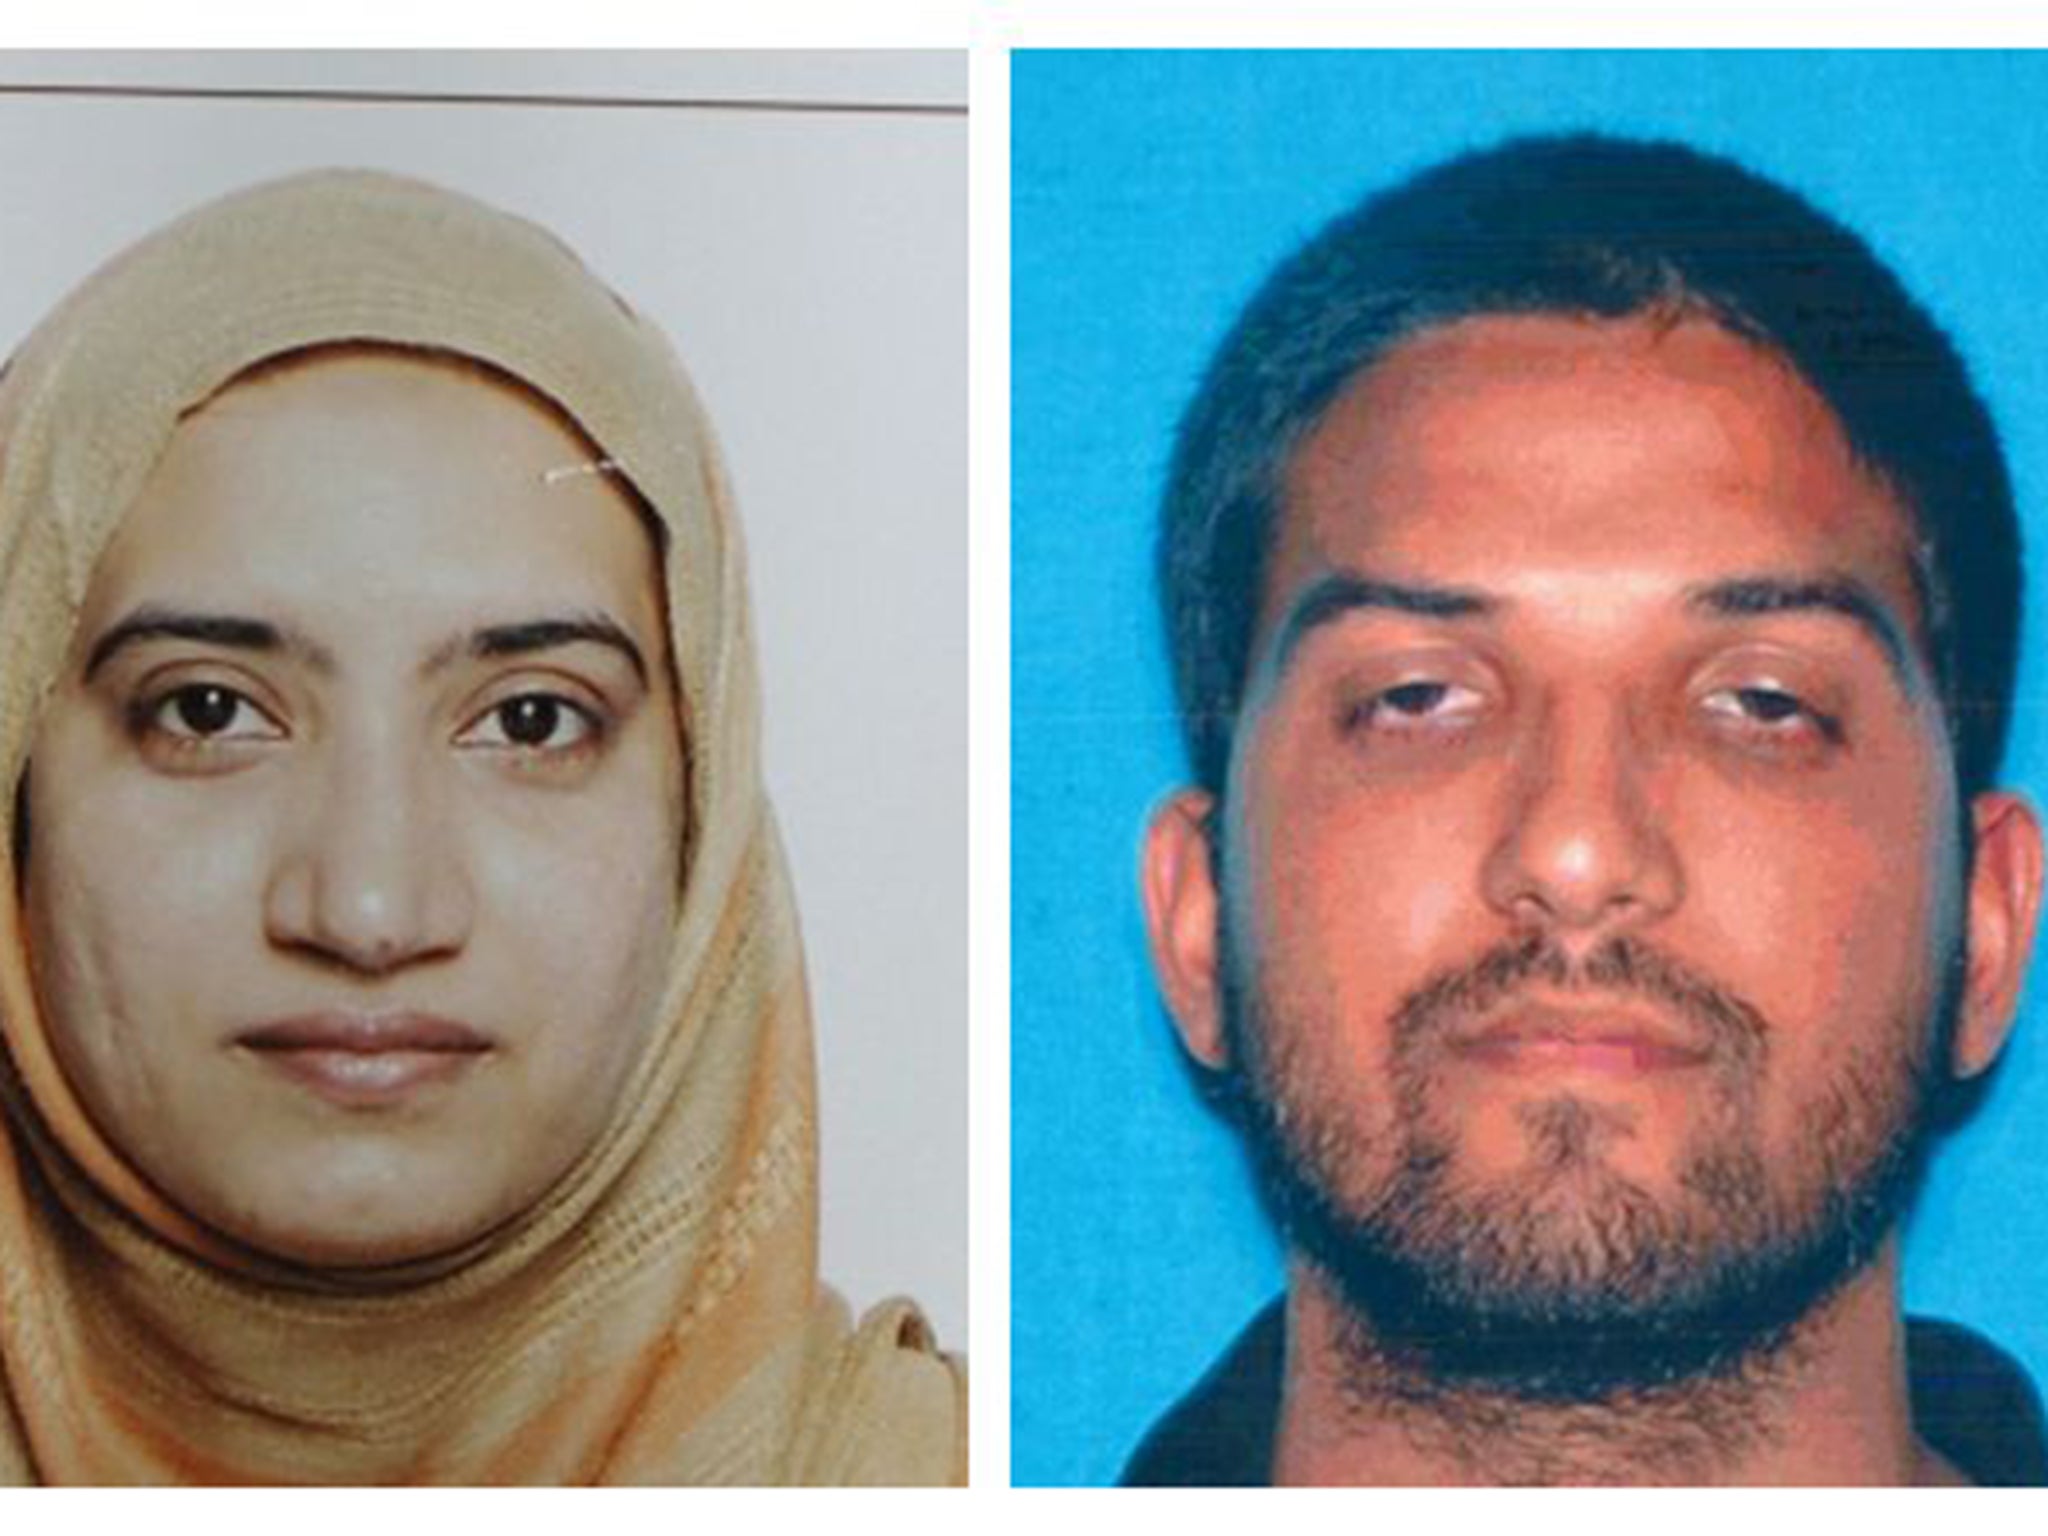 Tashfeen Malik and Syed Farook. The married couple died in a fierce gunbattle with authorities